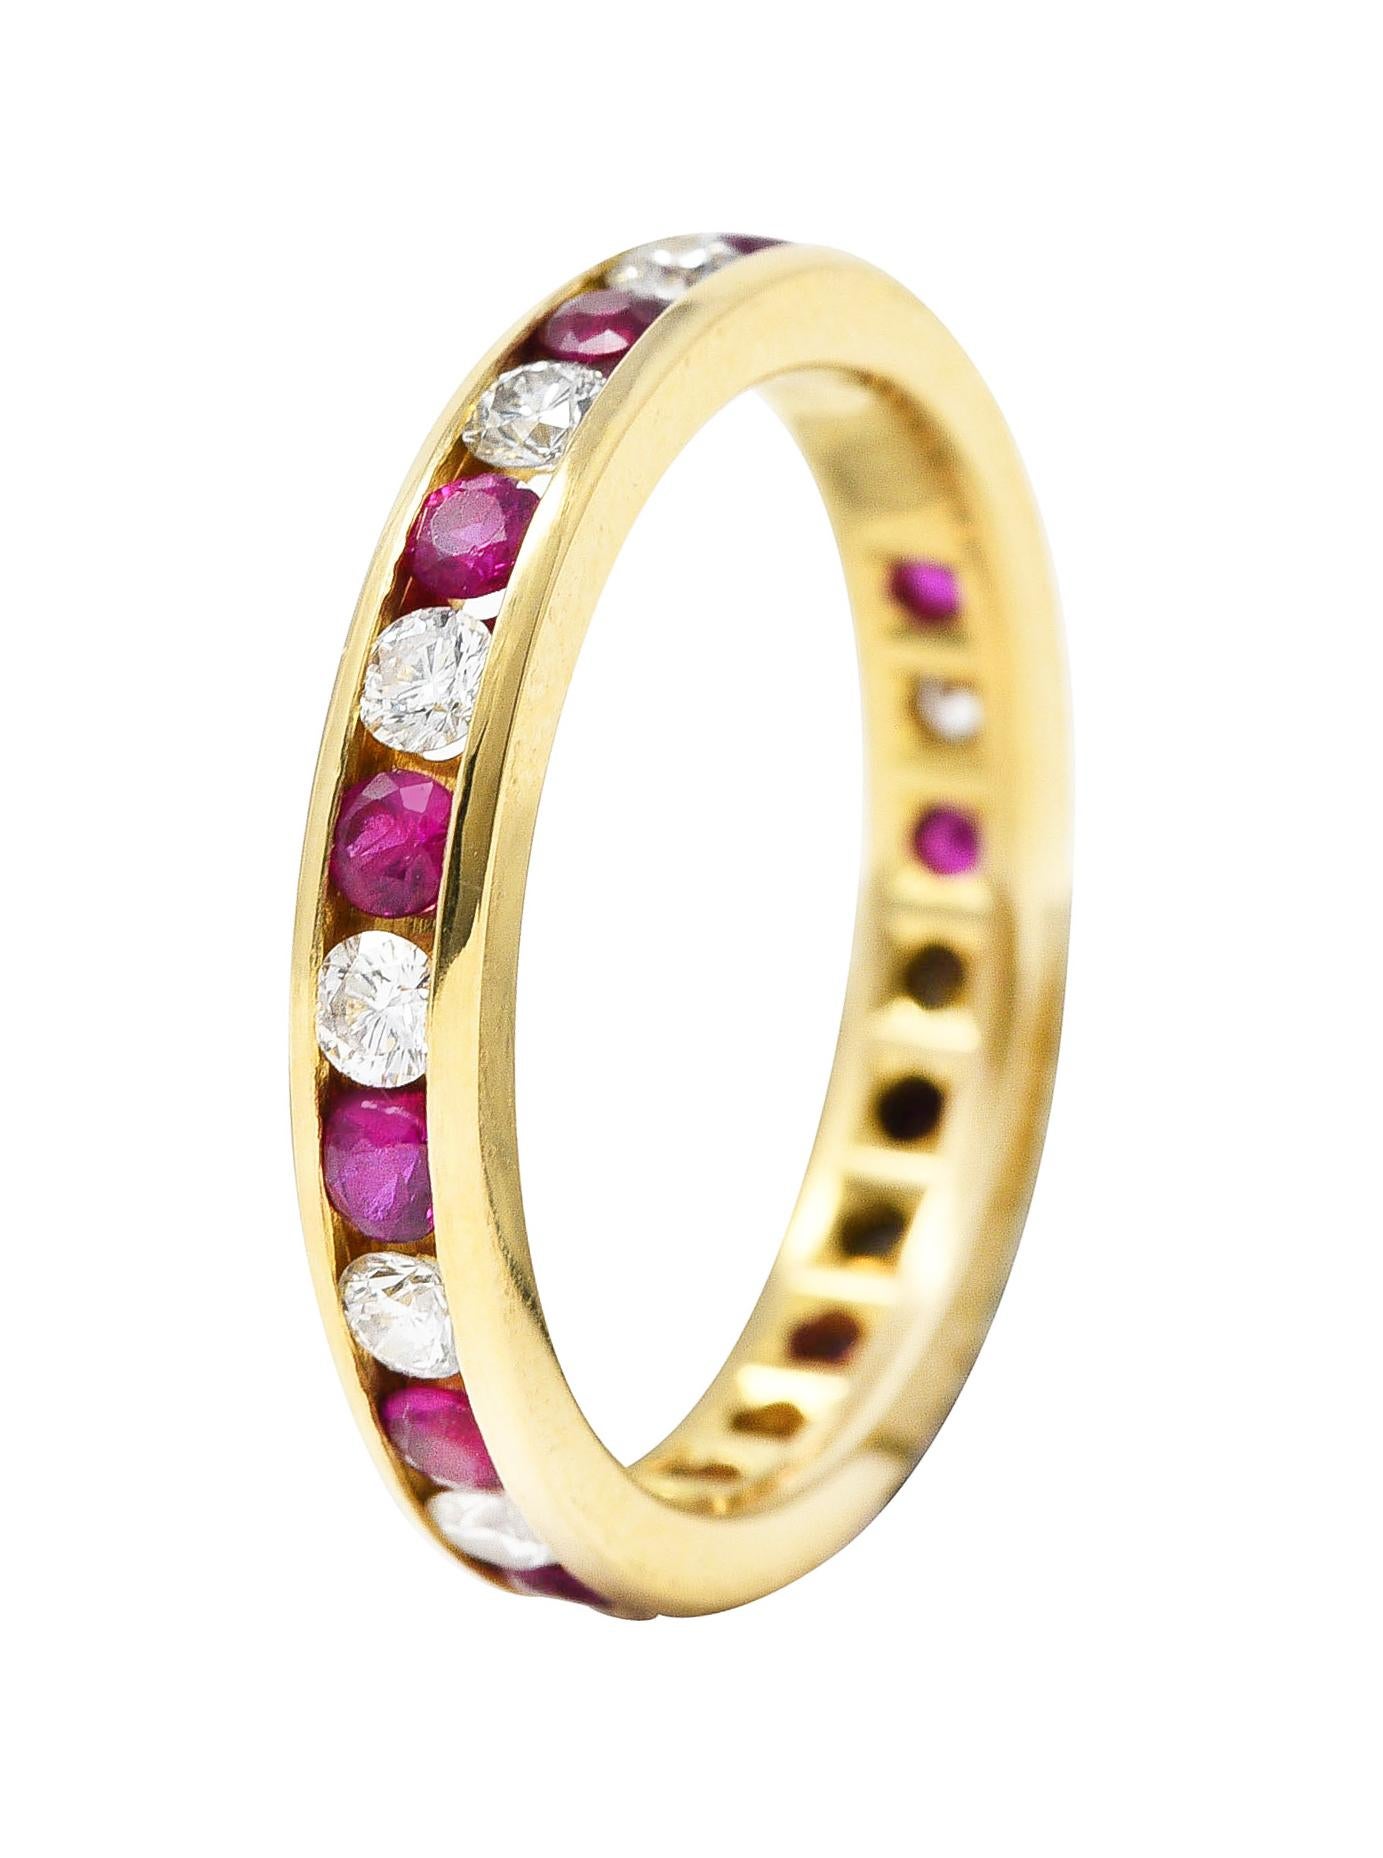 Featuring round brilliant cut diamonds alternating with round cut rubies - channel set fully around. Diamonds weigh approximately 0.52 carat total - G/H color with VS clarity. Rubies weigh approximately 0.68 carat total - transparent bright red in